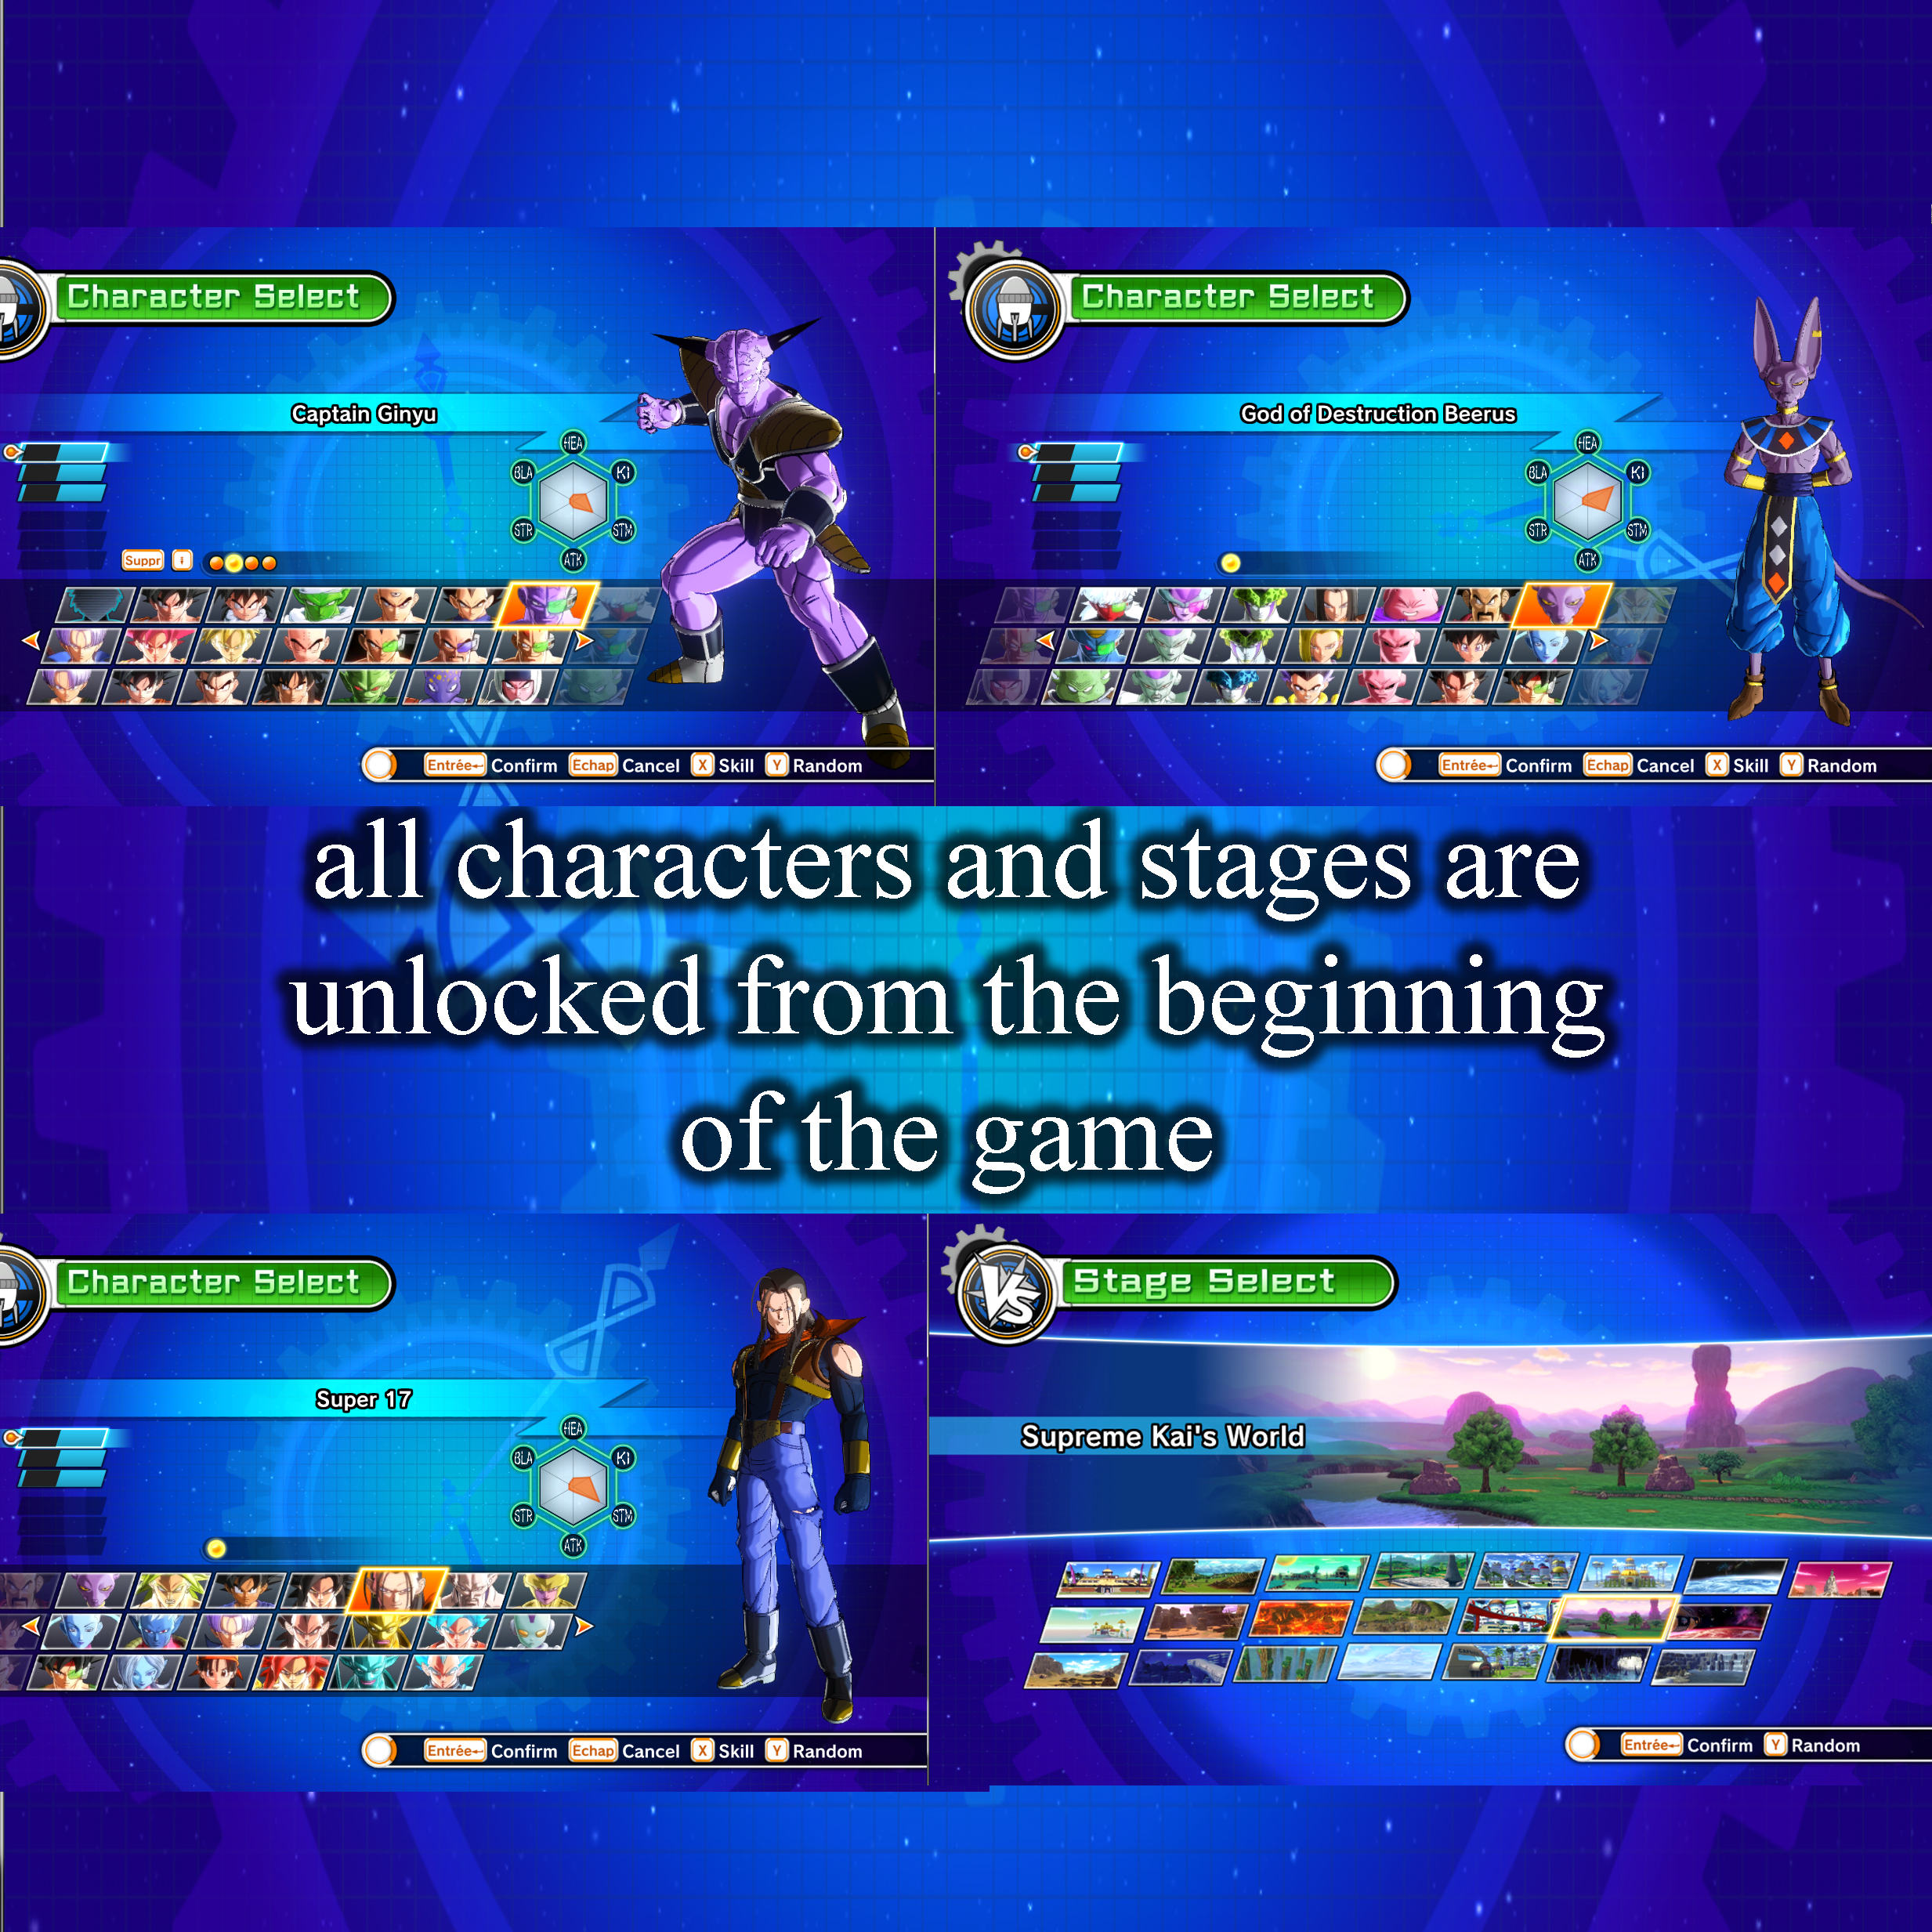 All characters and stages unlocked from the beginning